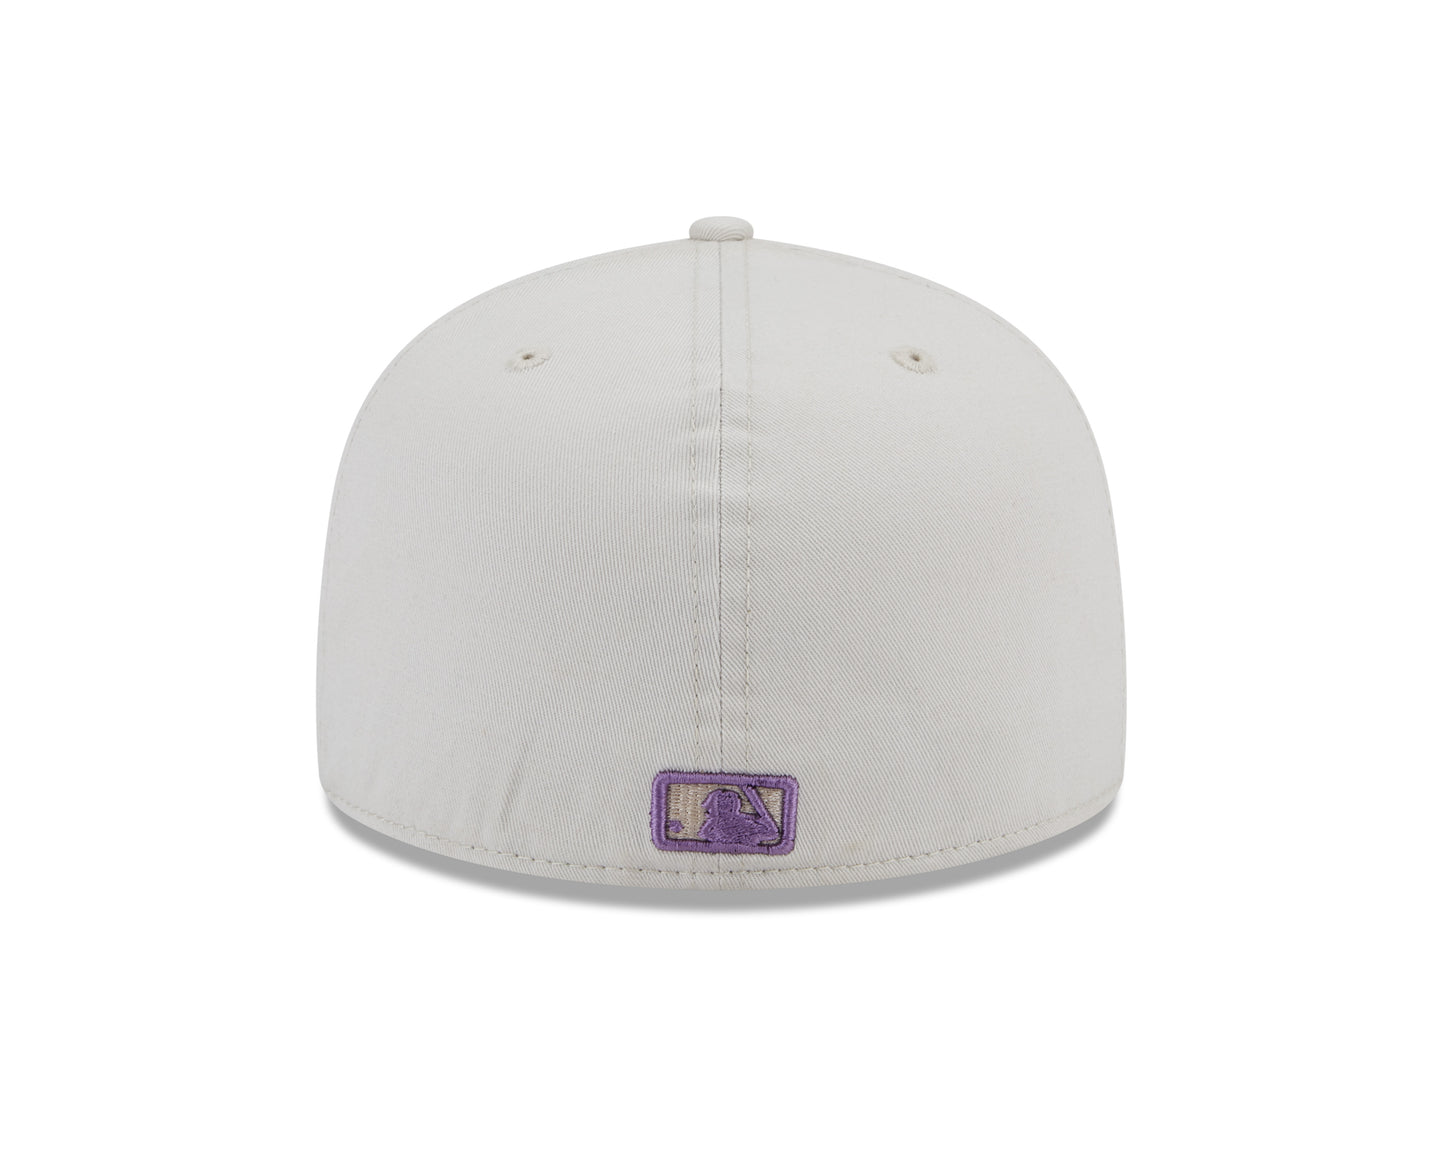 New Era 59Fifty Fitted Cap League Essential Los Angeles Dodgers - Stone/Purple - Headz Up 